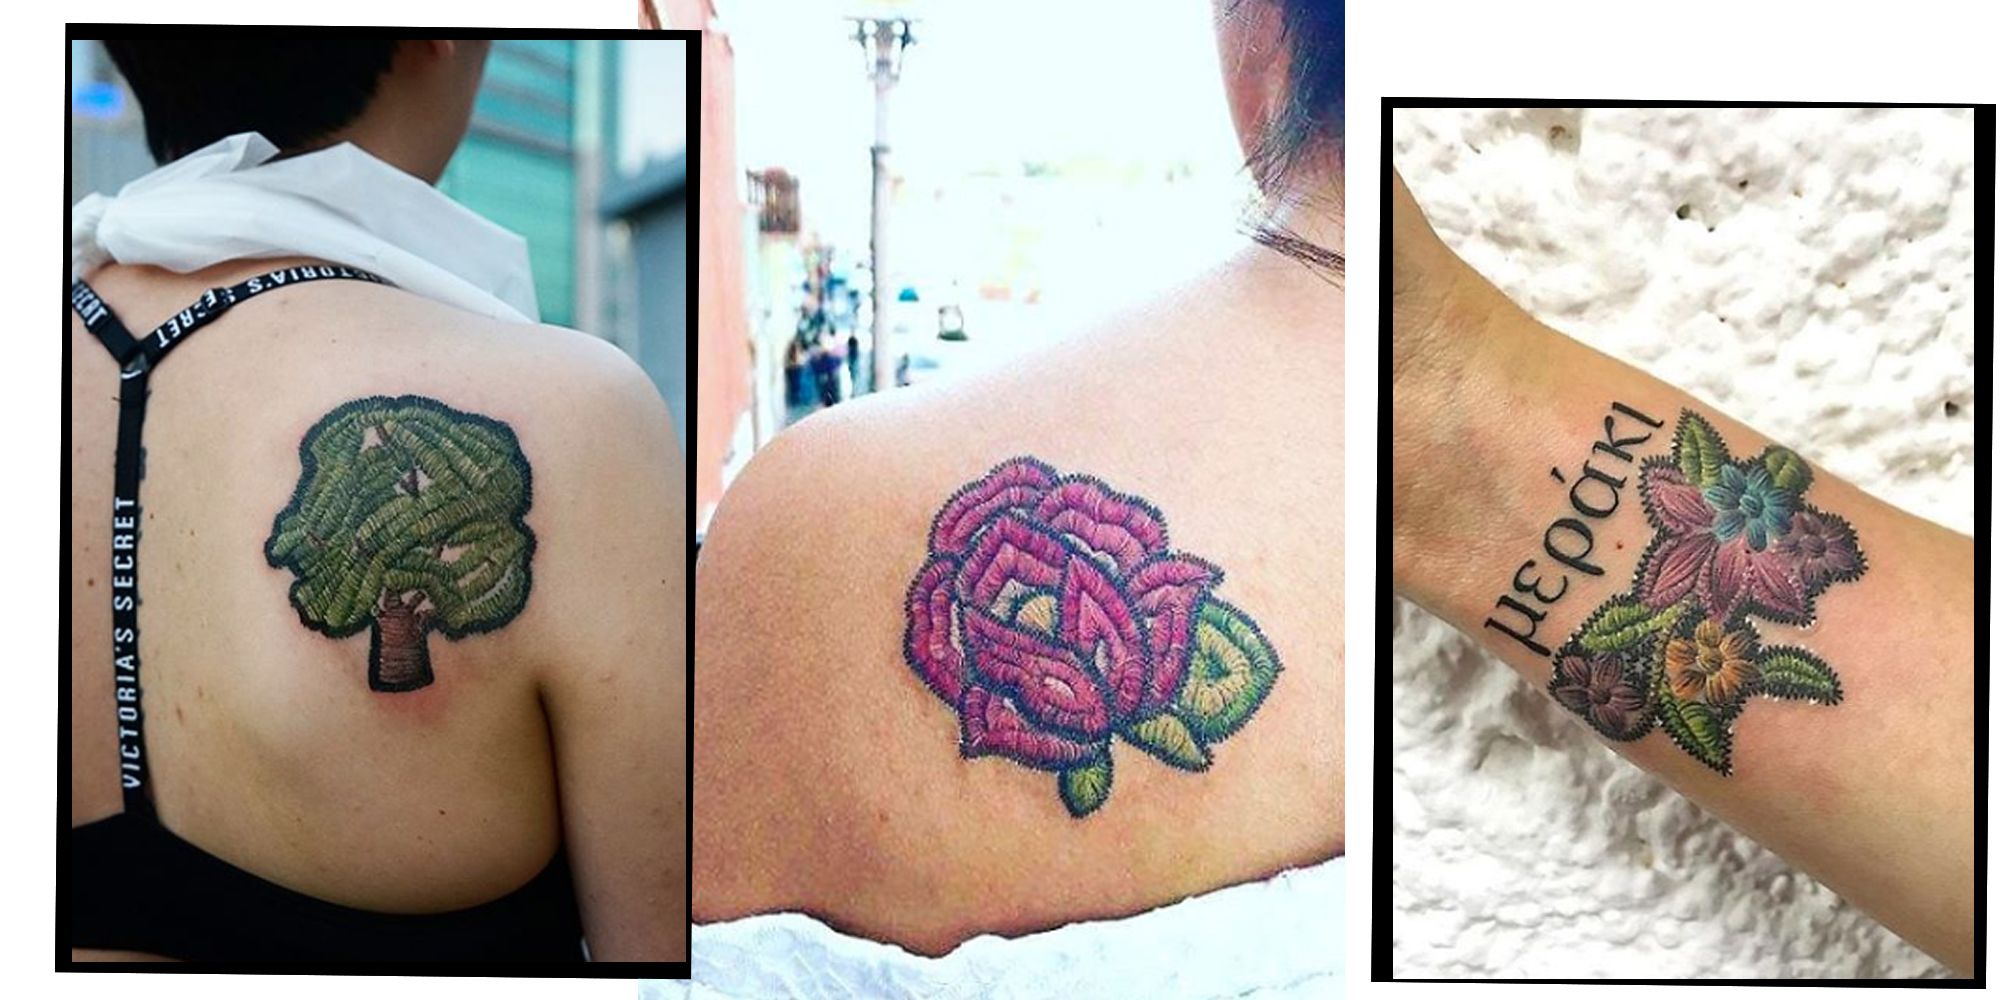 Embroidery Tattoos Are The New Arts And Crafts Ink Trend That's Seriously Pretty